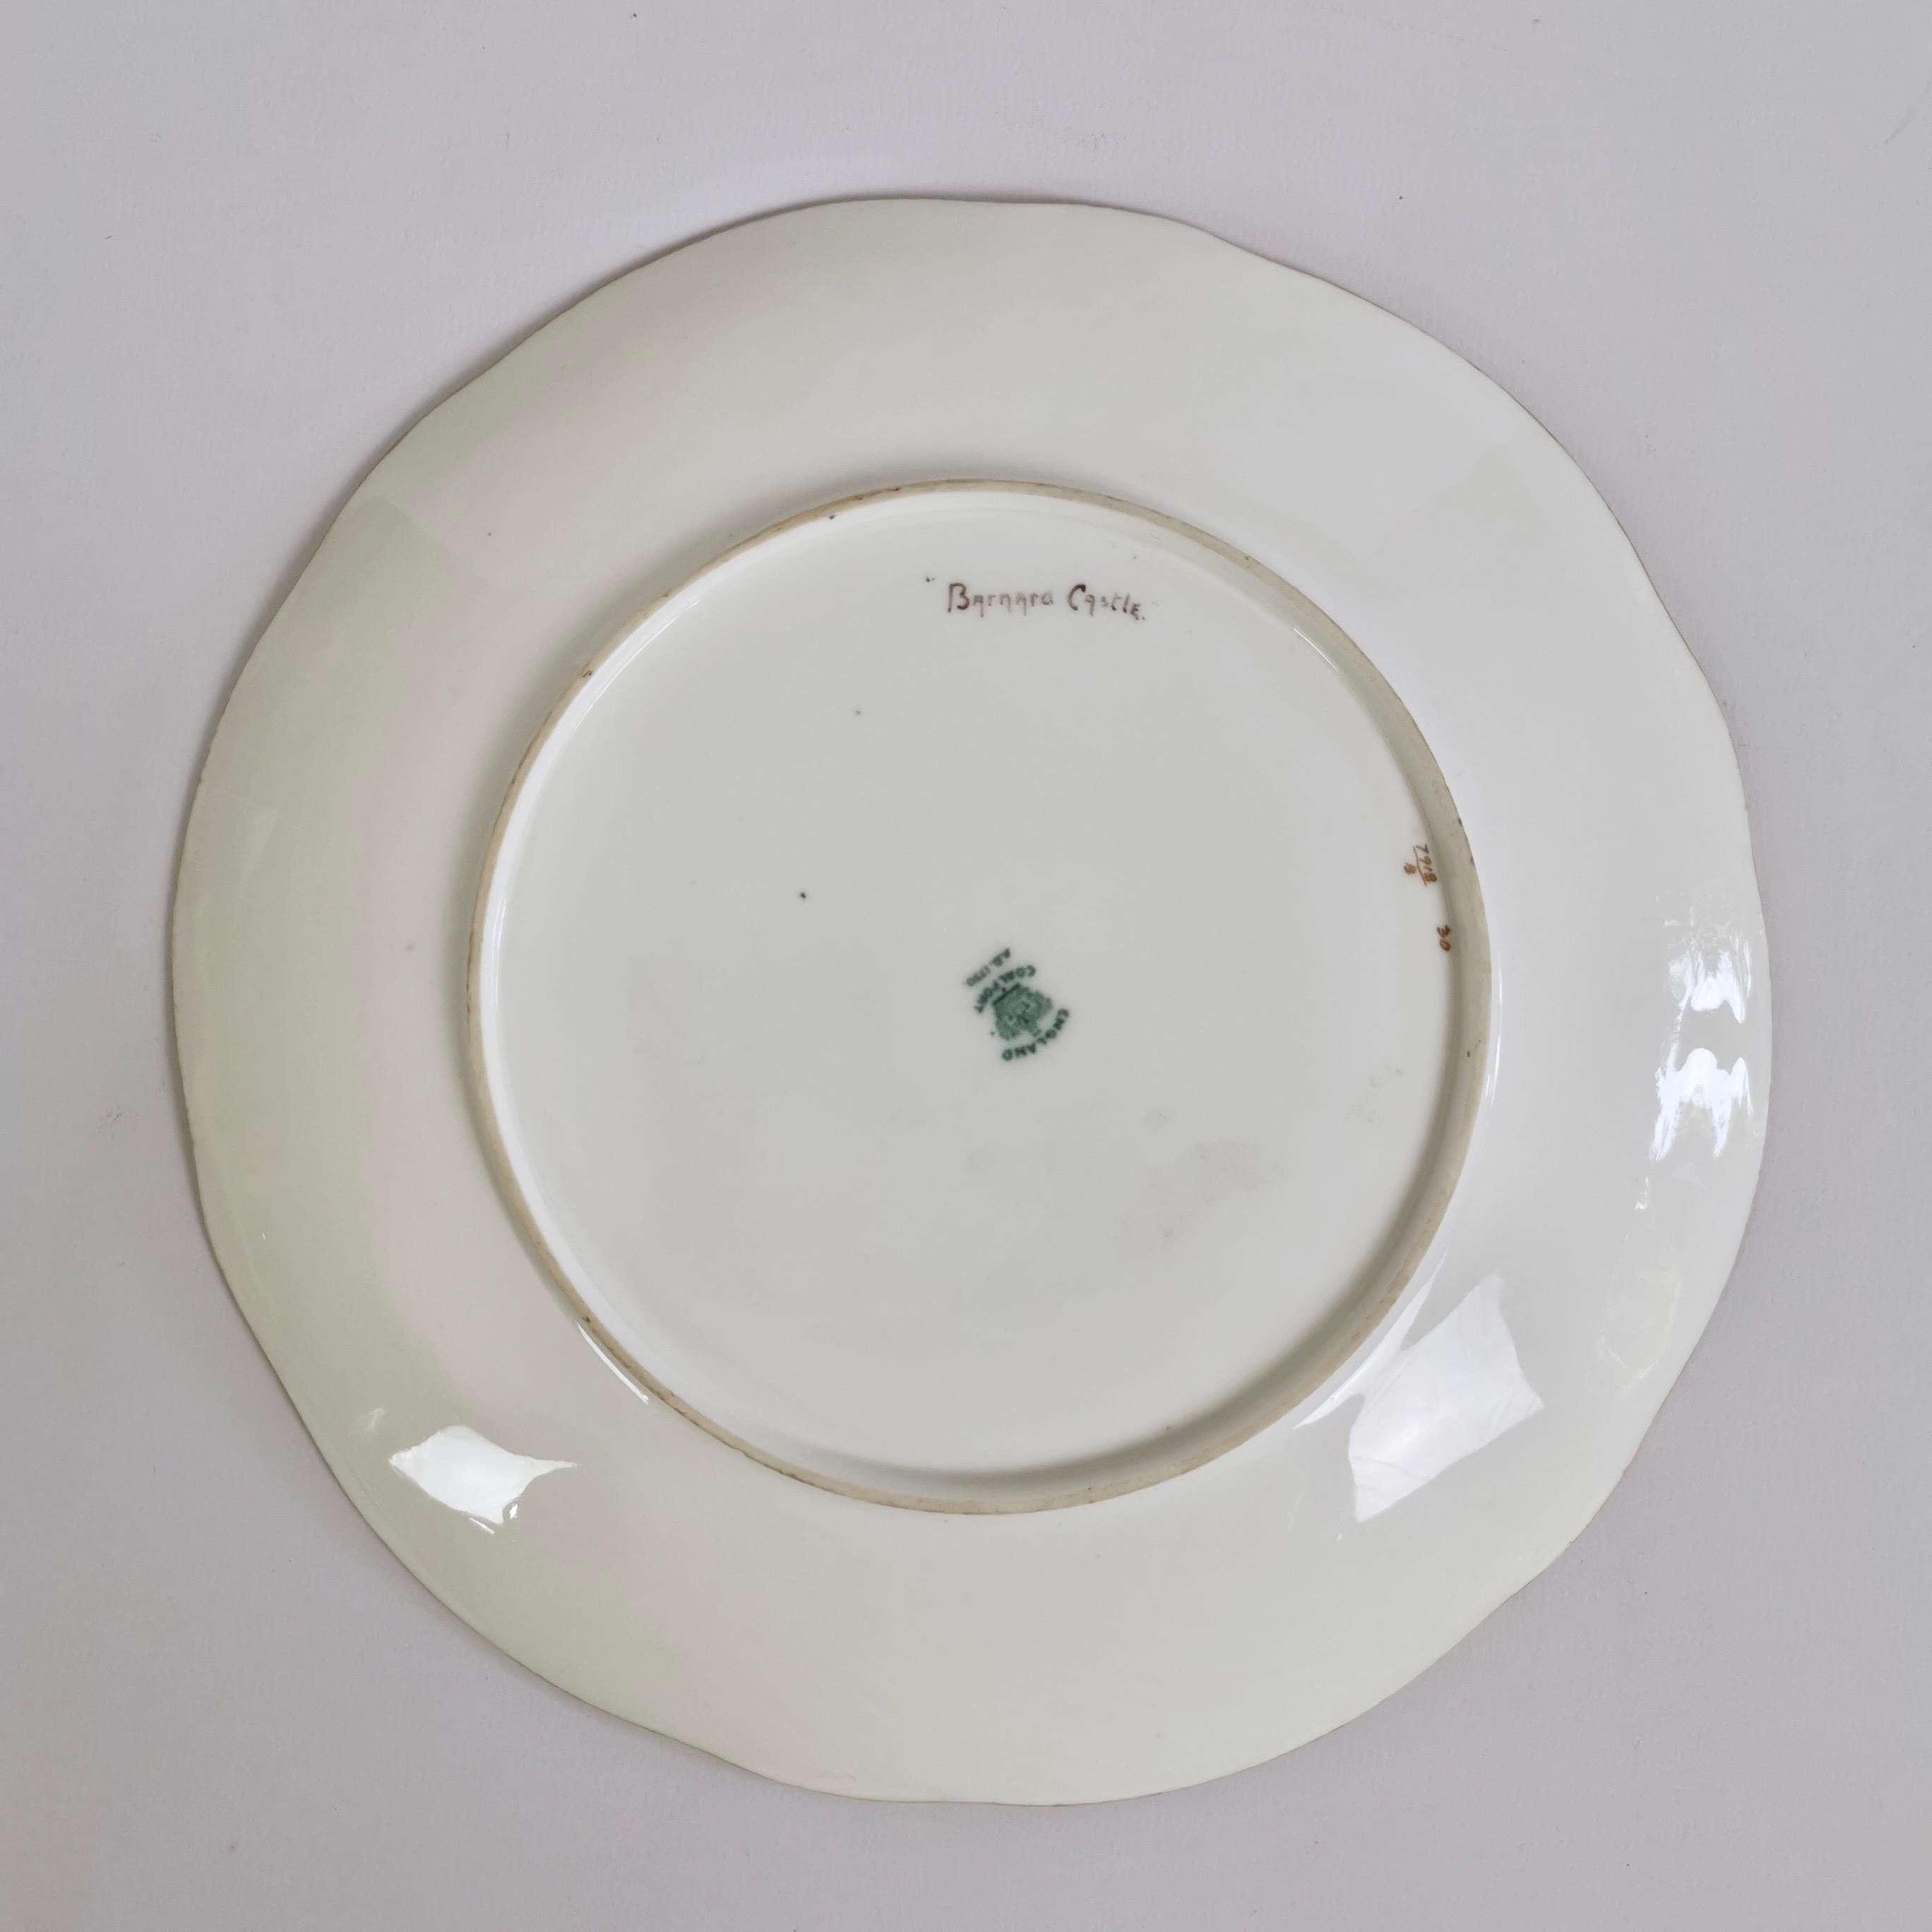 Early 20th Century Plate, Coalport for Thomas Goode, Barnard Castle by P.Simpson, 1915